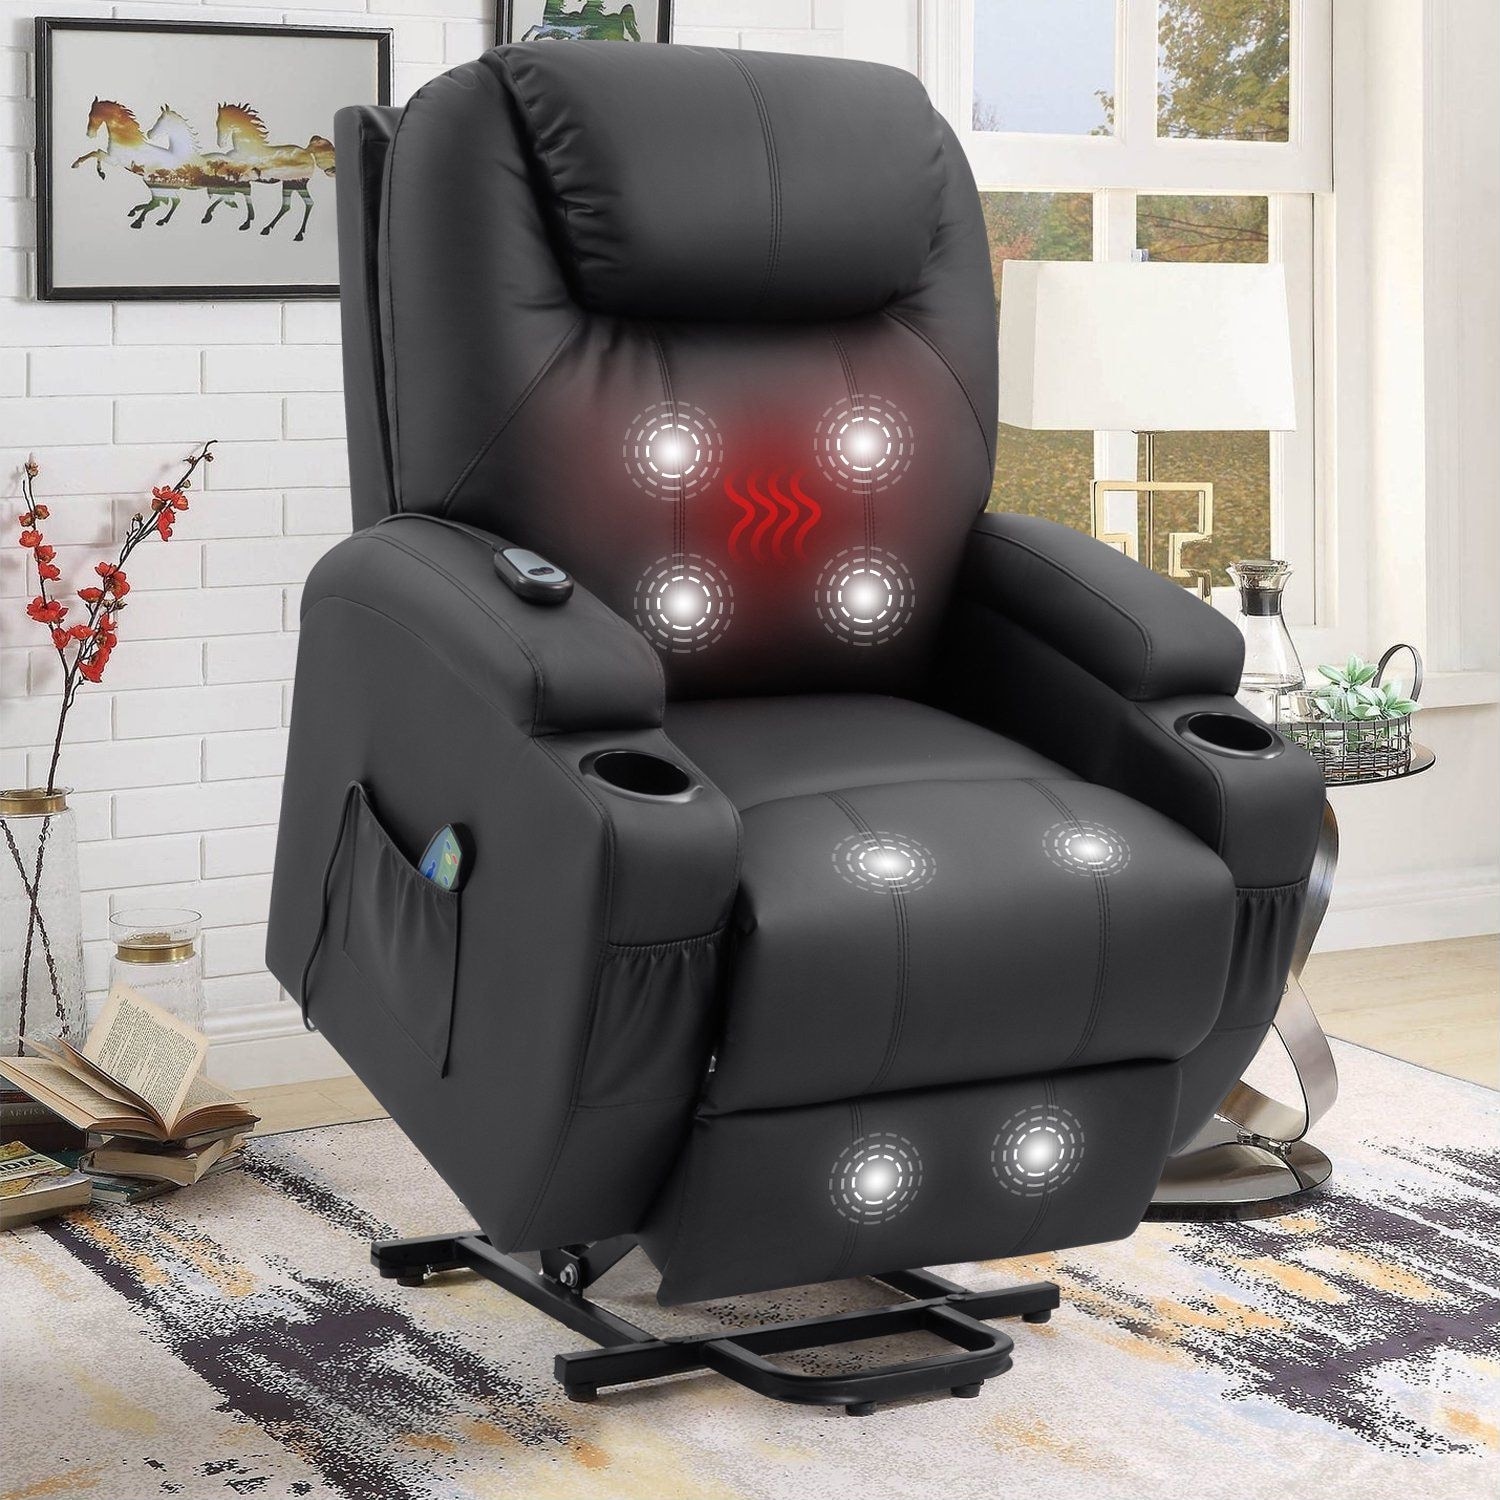 Homall Fabric Recliner Chair Ergonomic Adjustable Home Theater